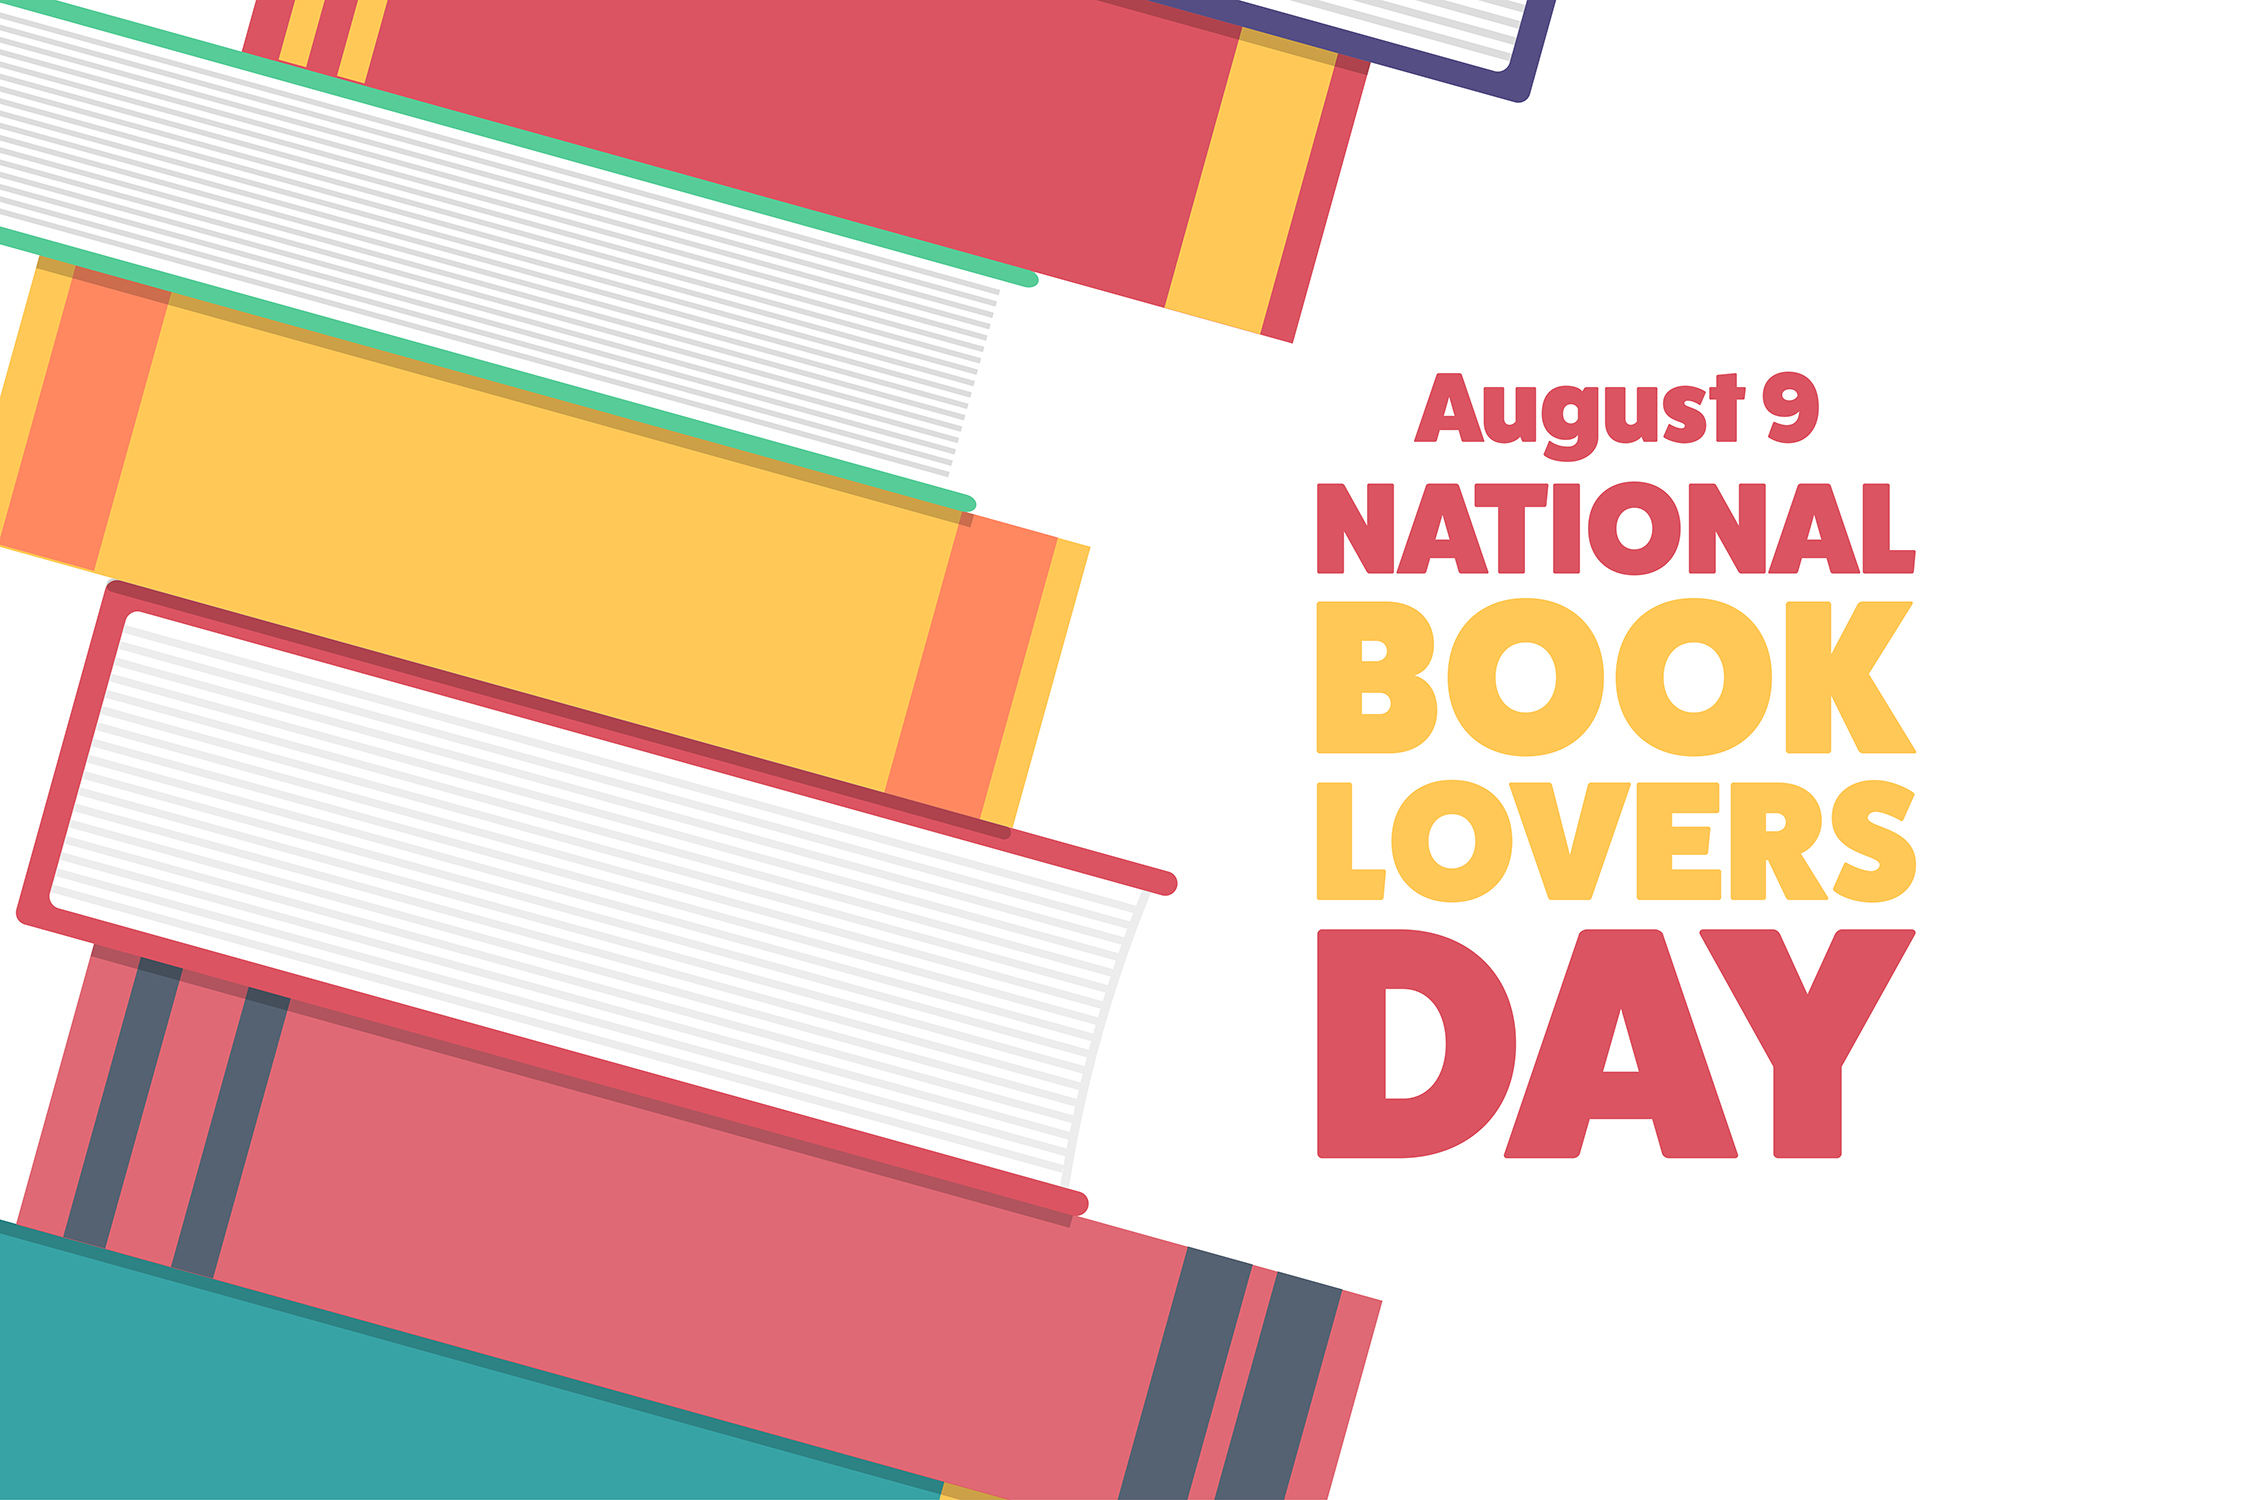 Graphic promoting August 9 as National Book Lovers Day